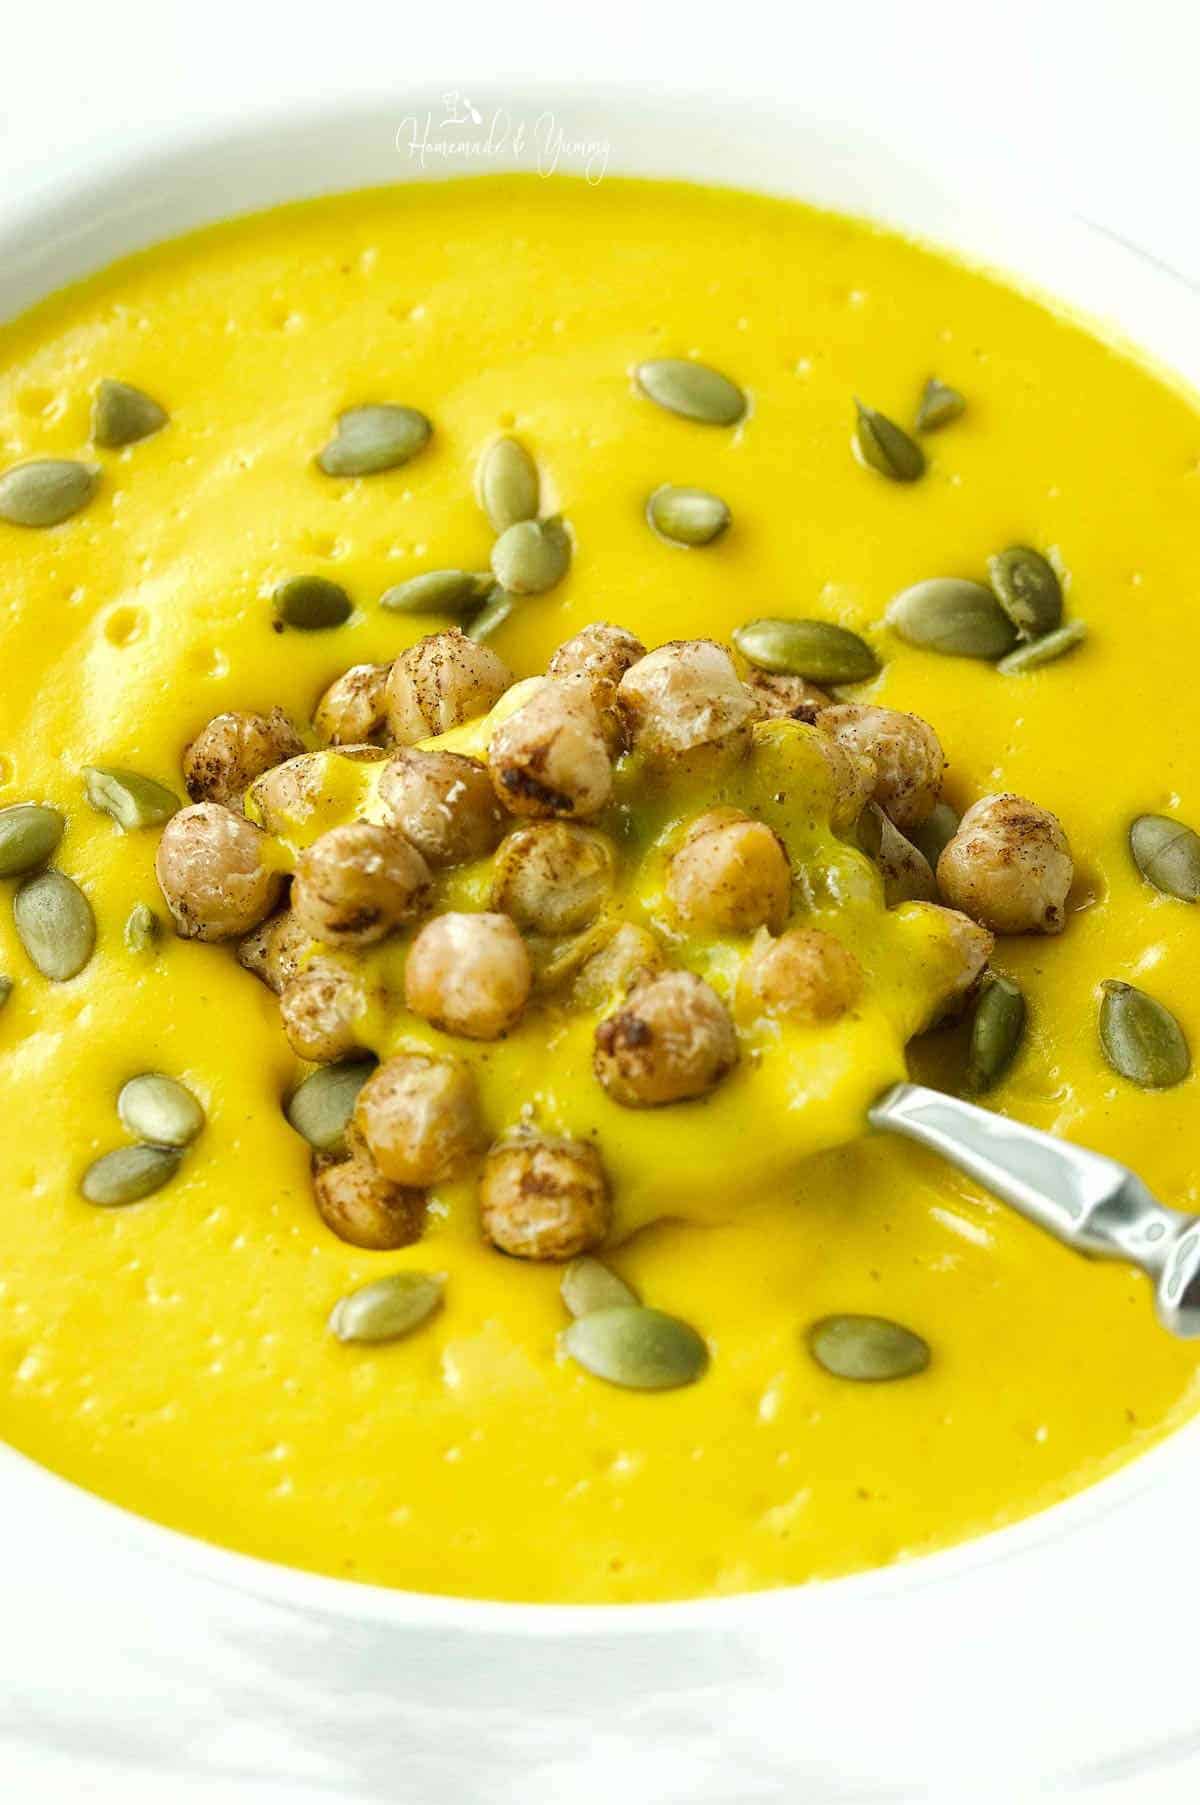 A spoonful of creamy pumpkin soup with roasted chickpea garnish.